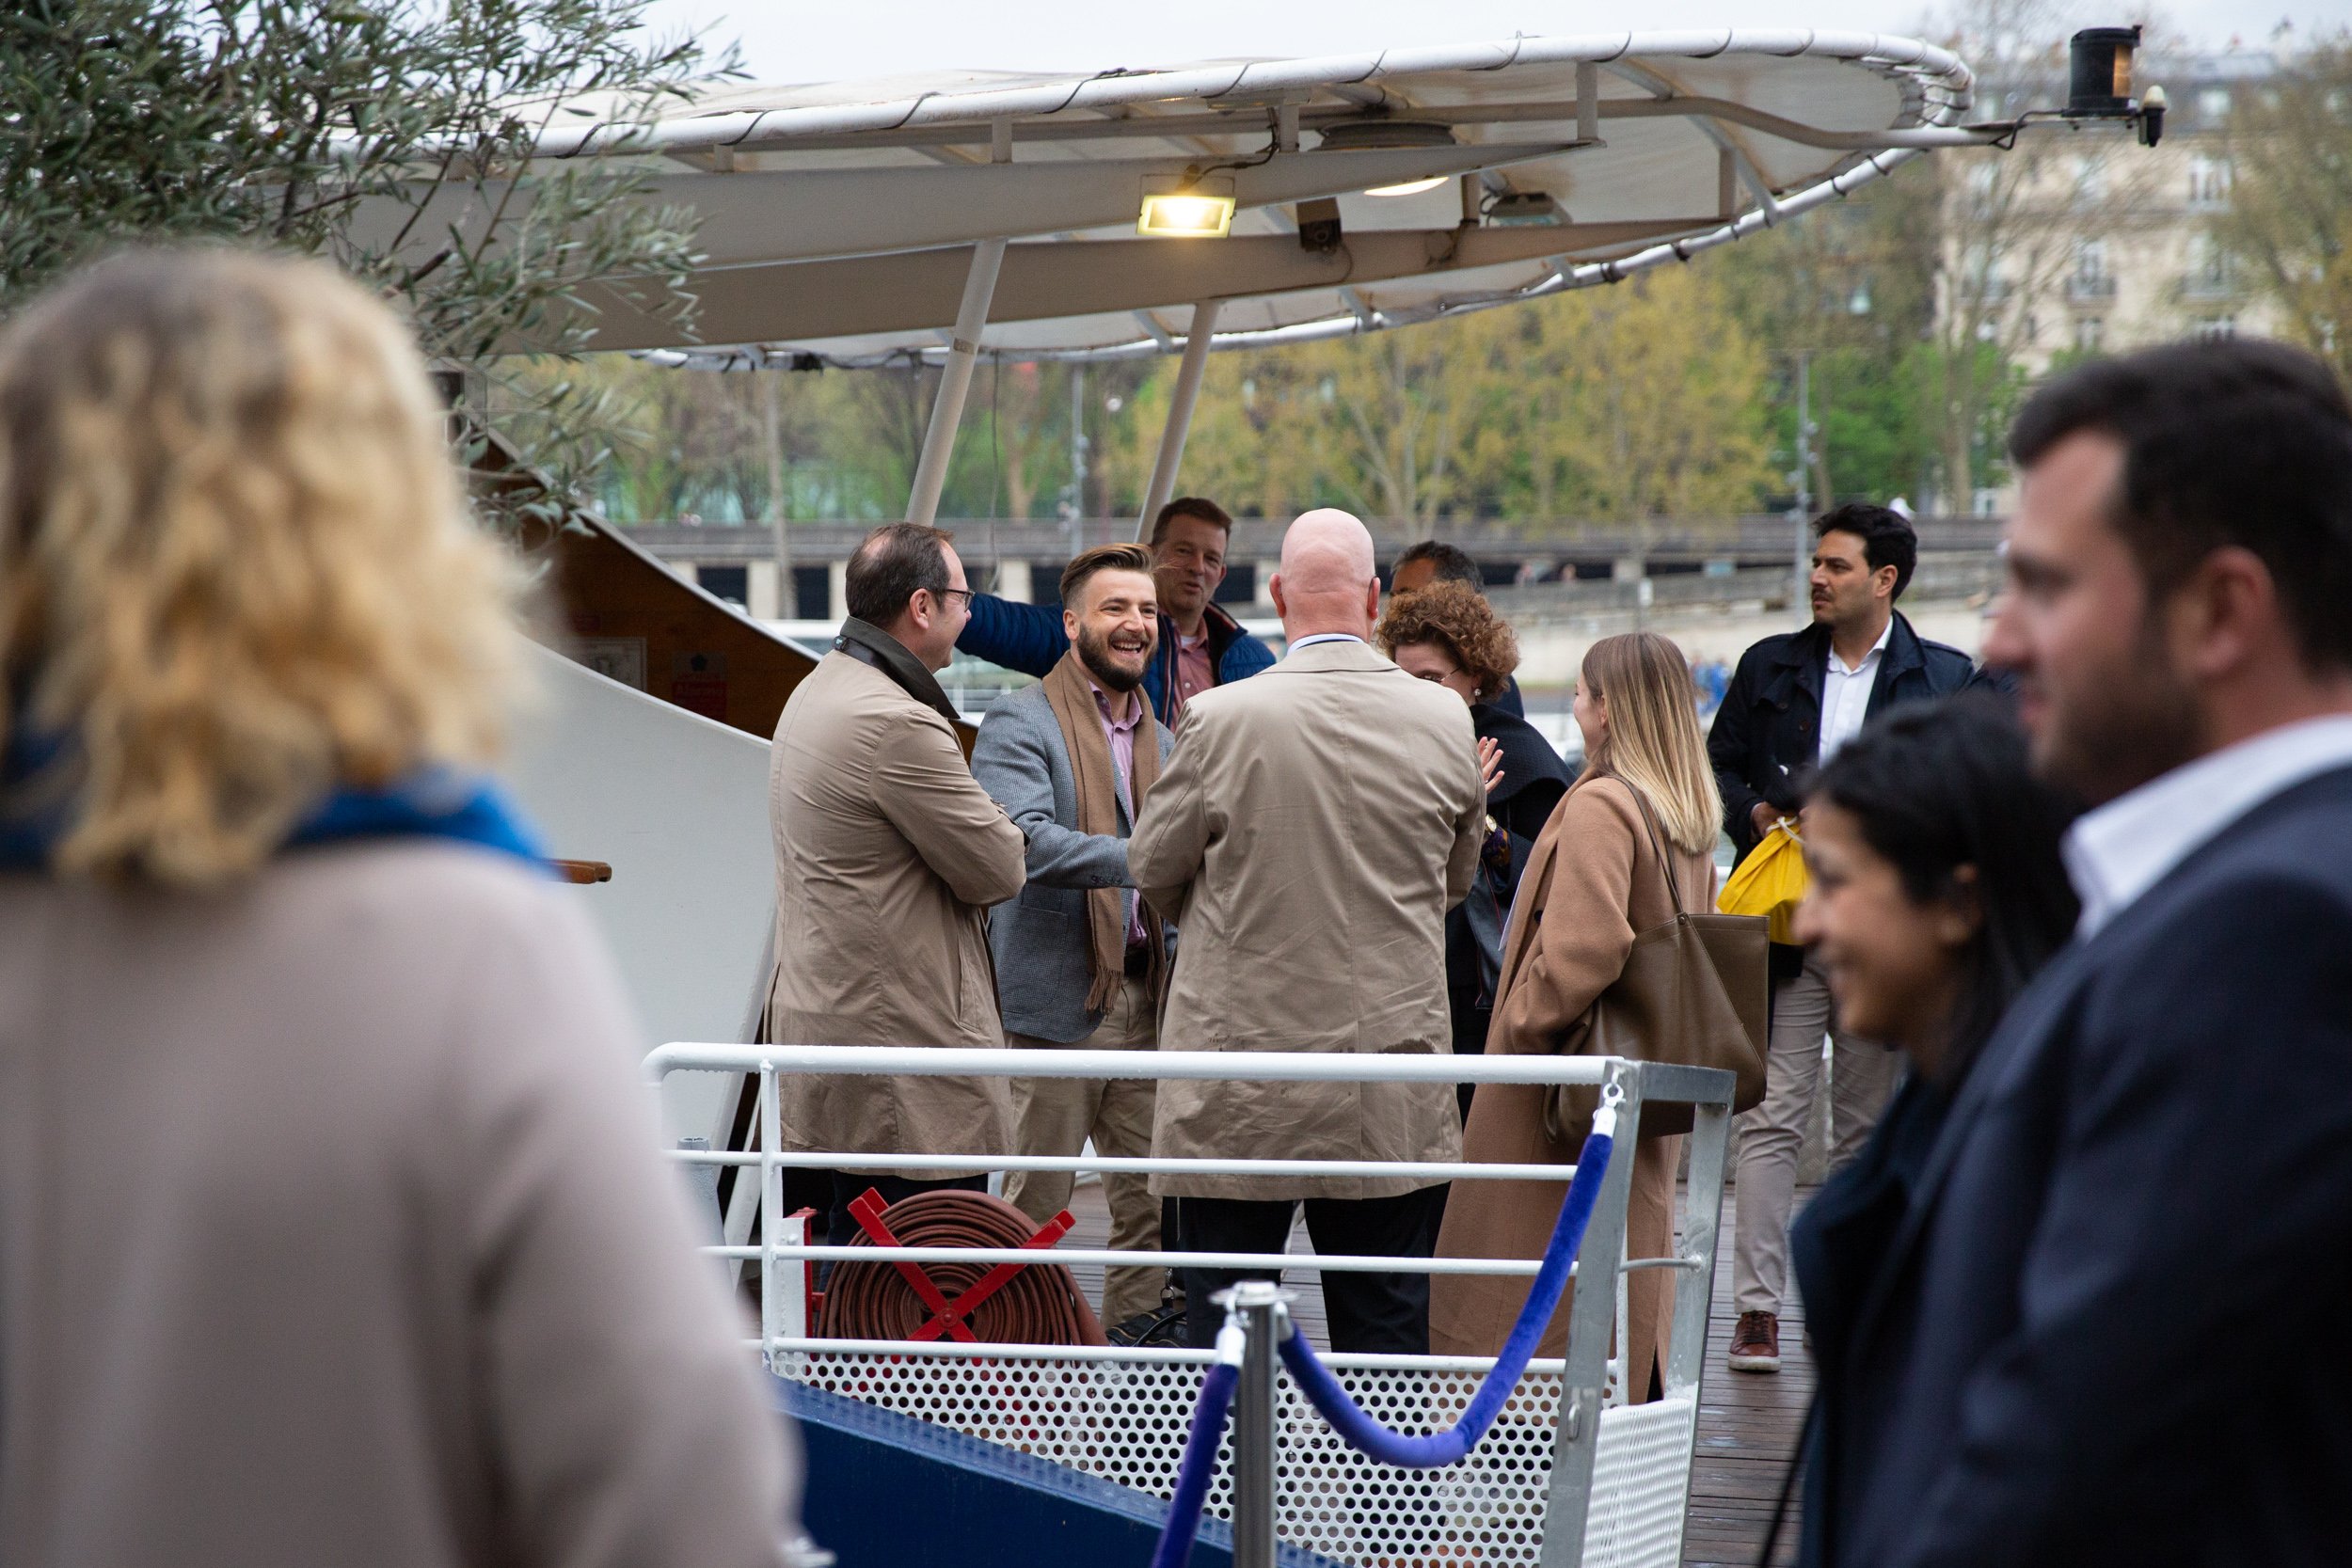  guests-network-by-river-seine 